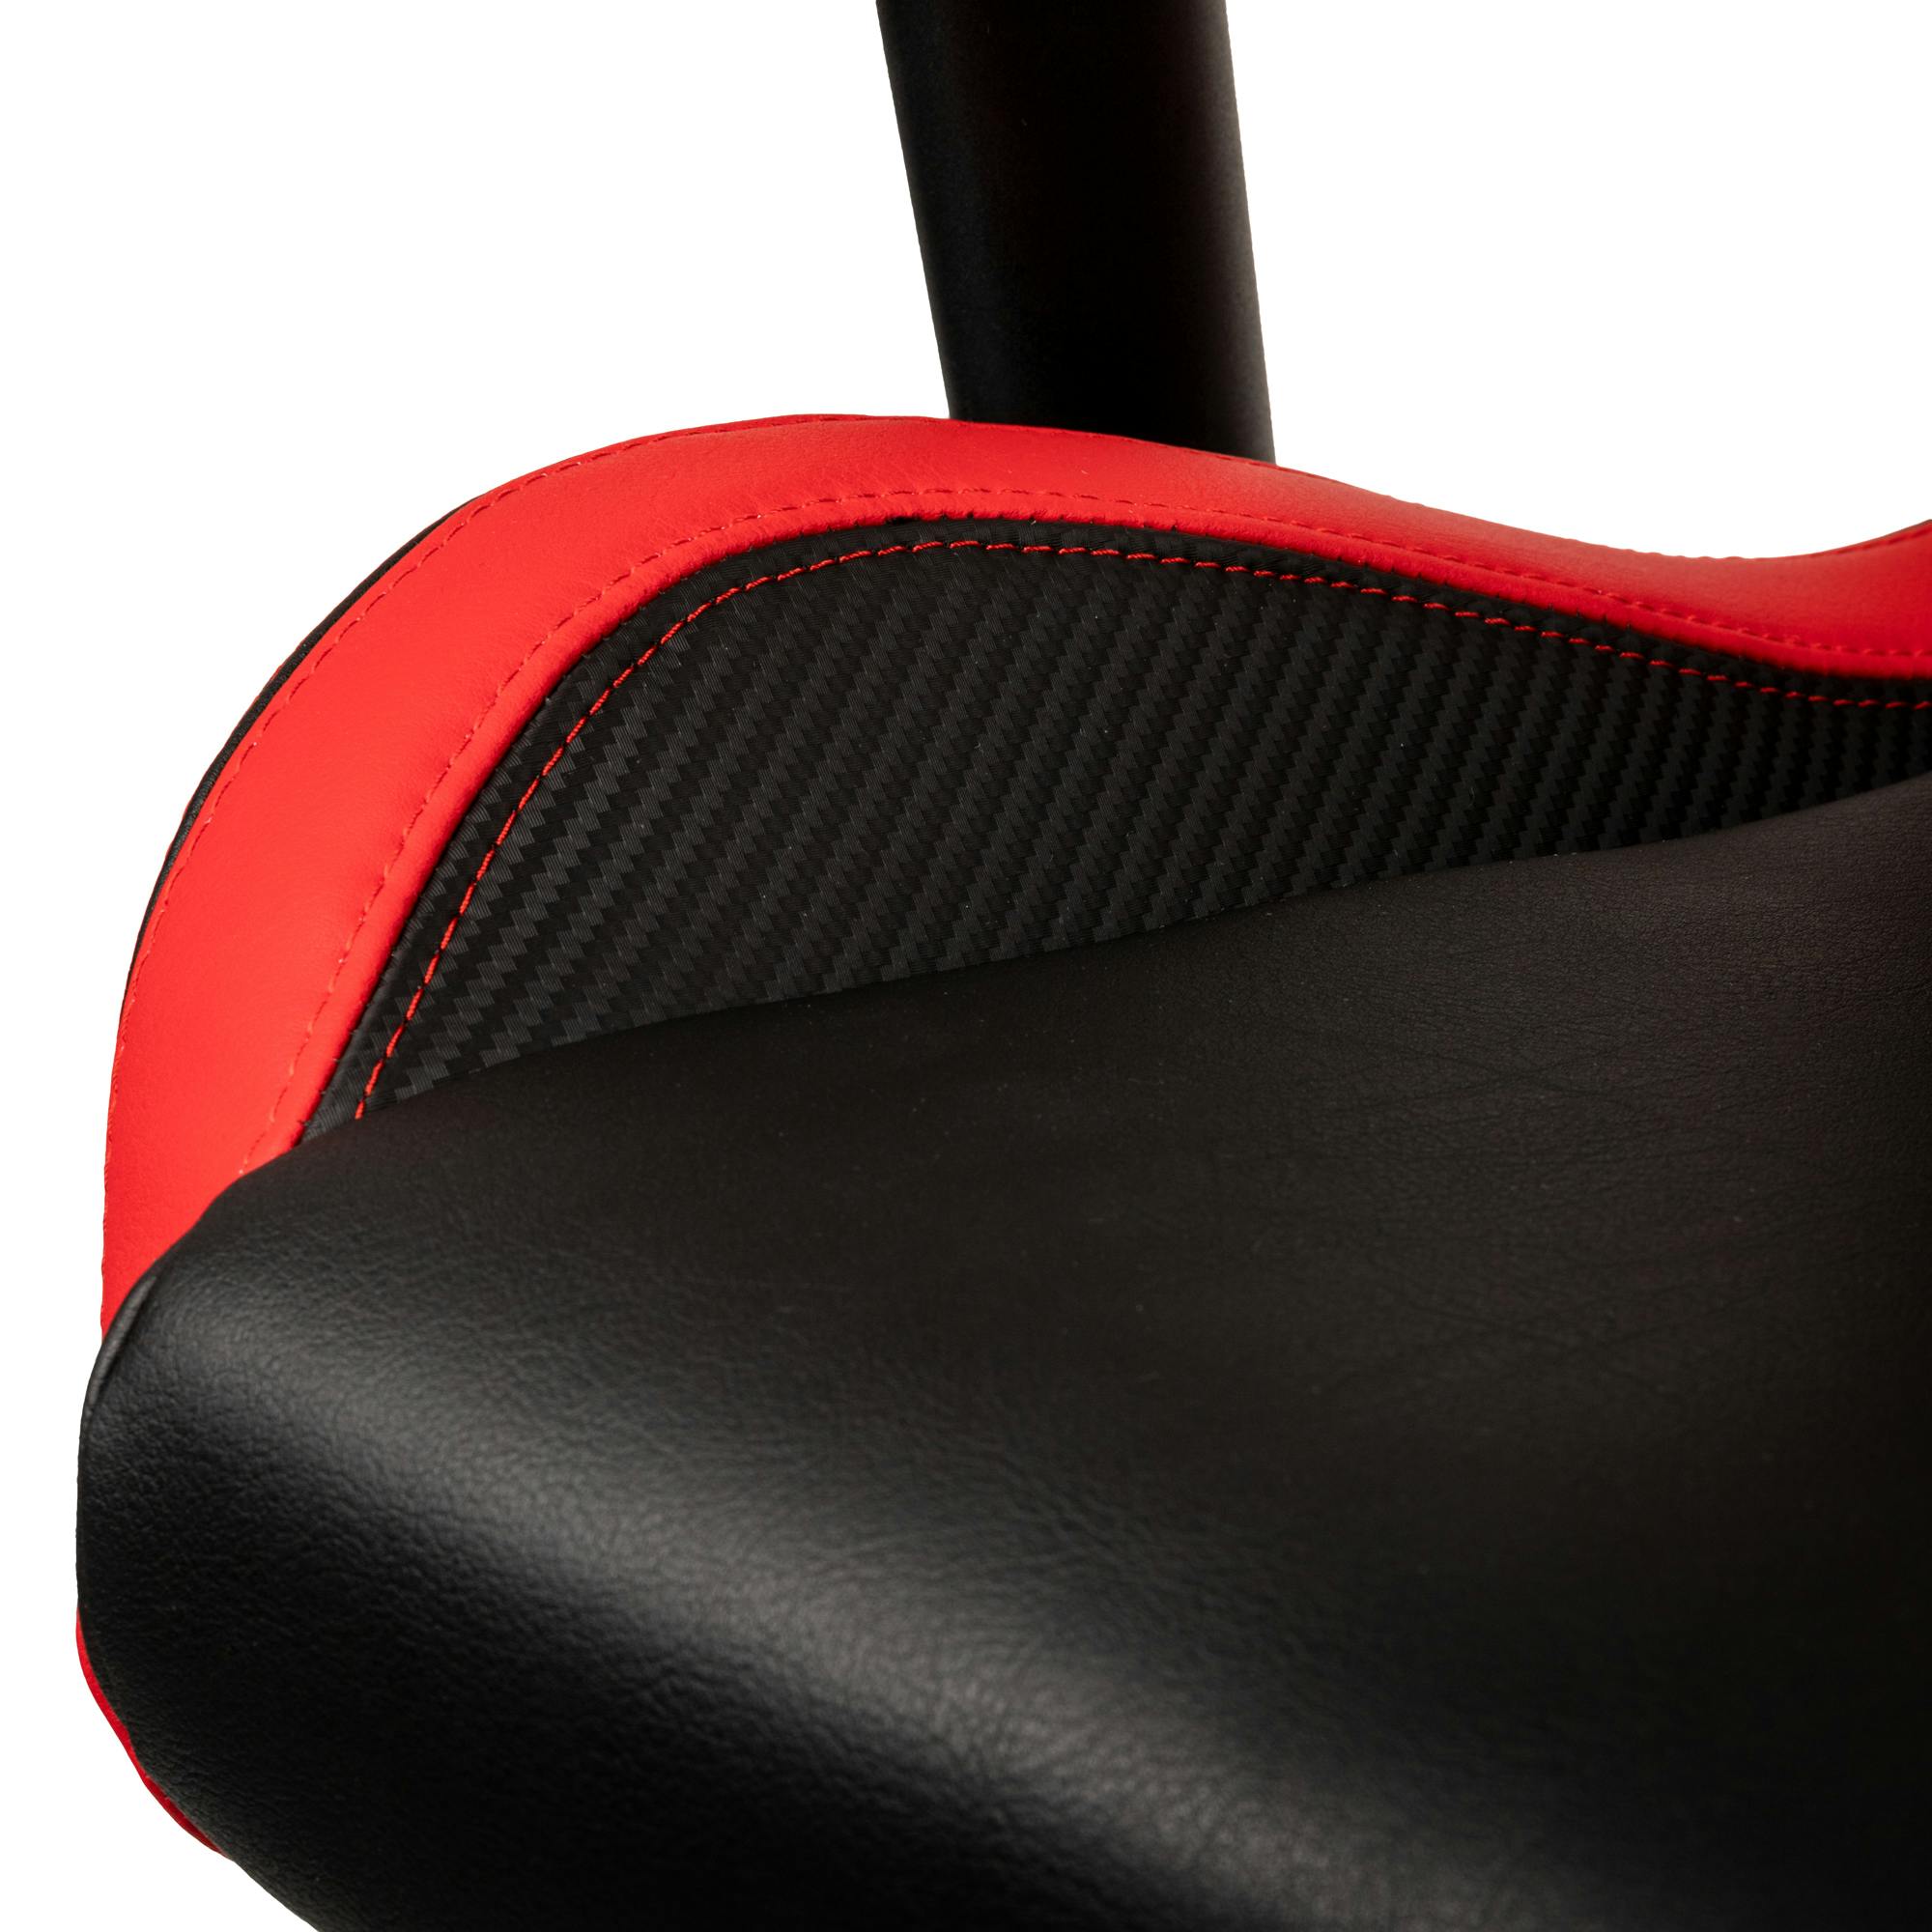 Noblechairs - EPIC Compact  Schwarz/Carbon/Rot